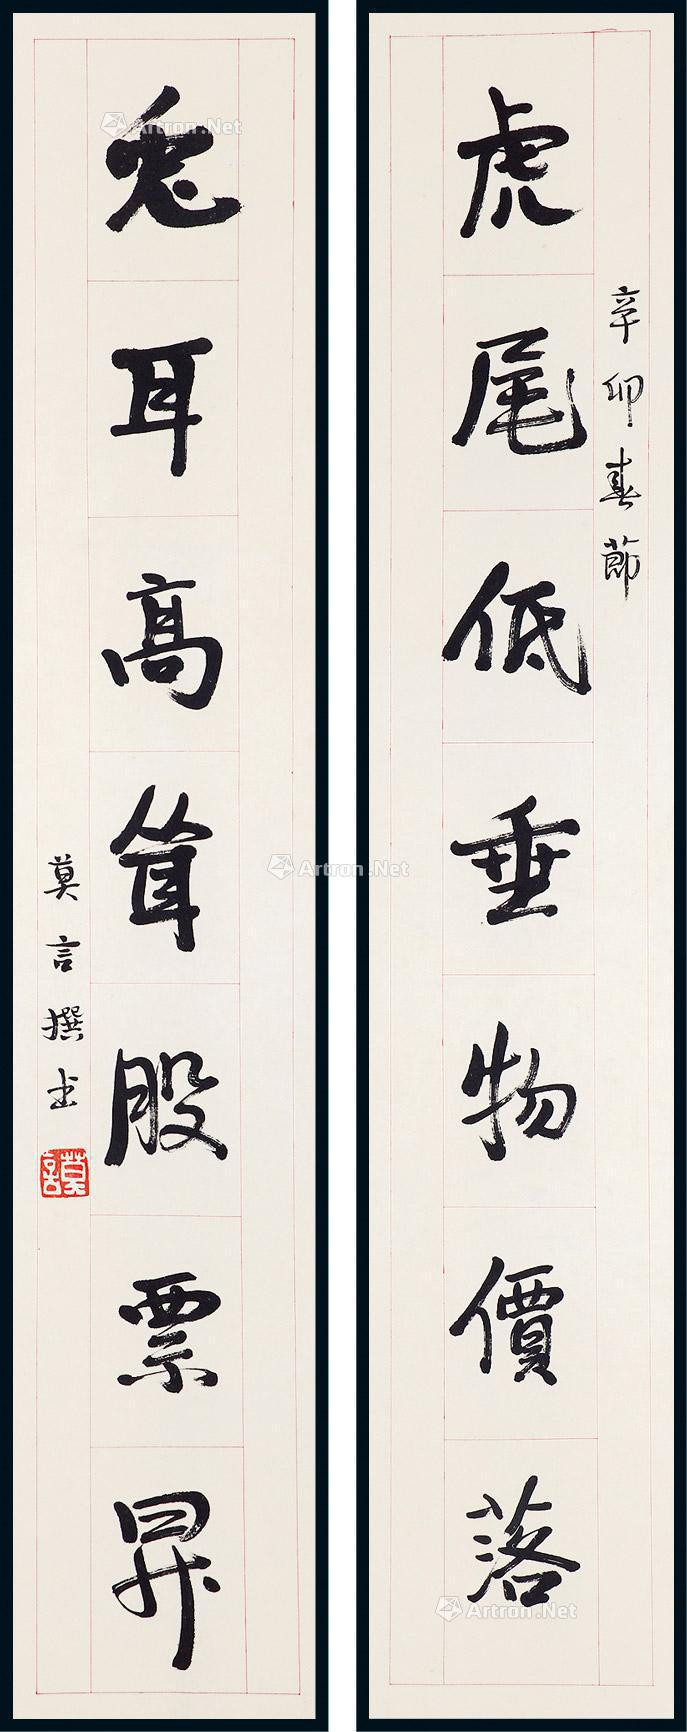 Calligraphy couplet by Mo Yan